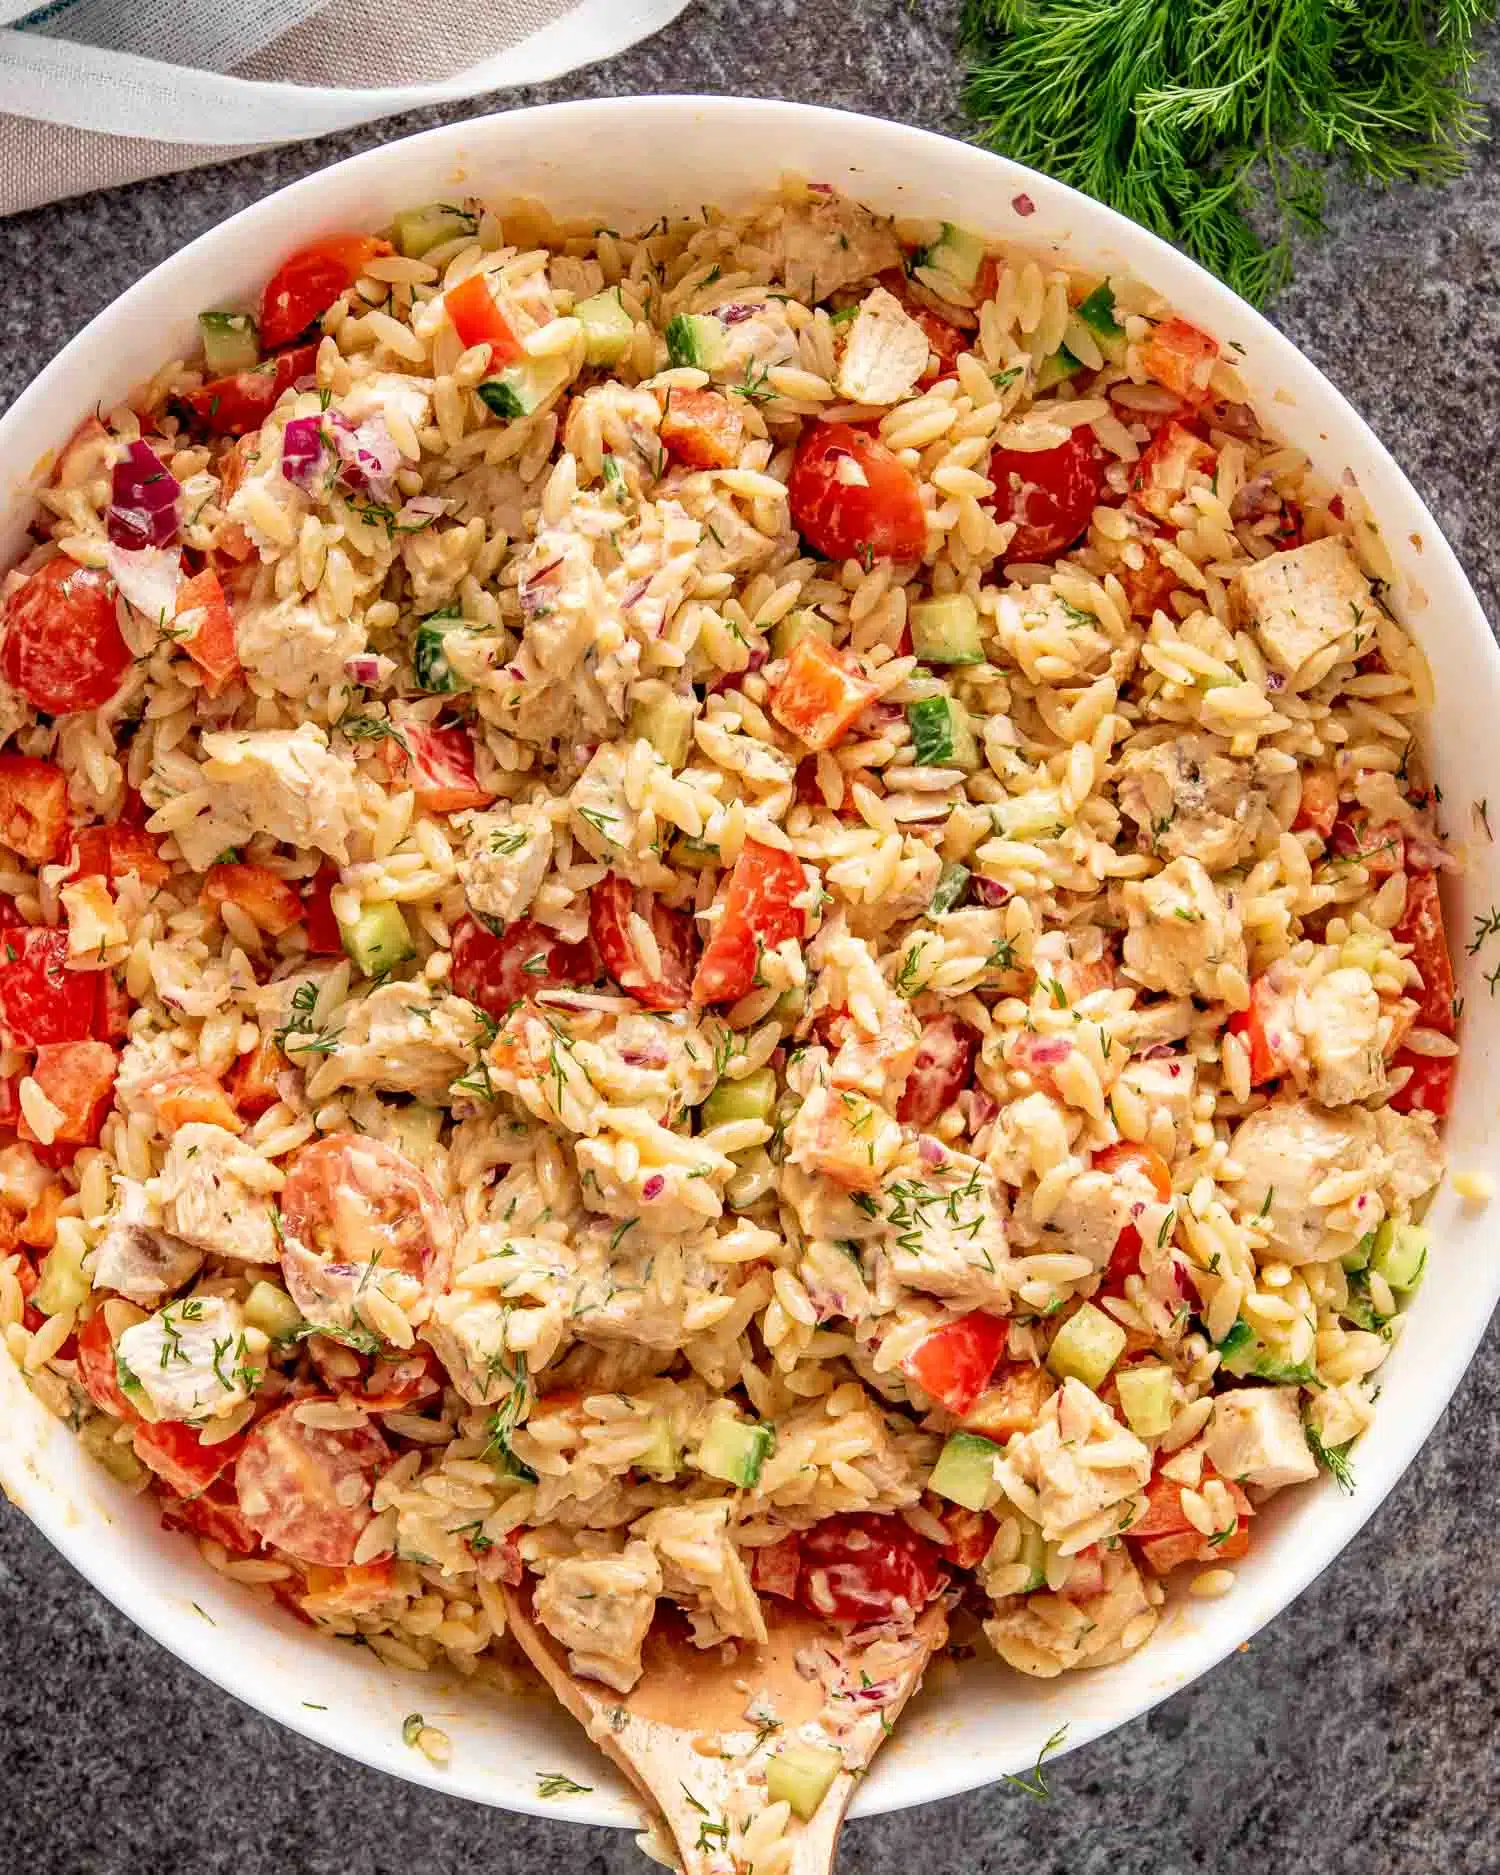 freshly made chicken orzo pasta salad in a white bowl.